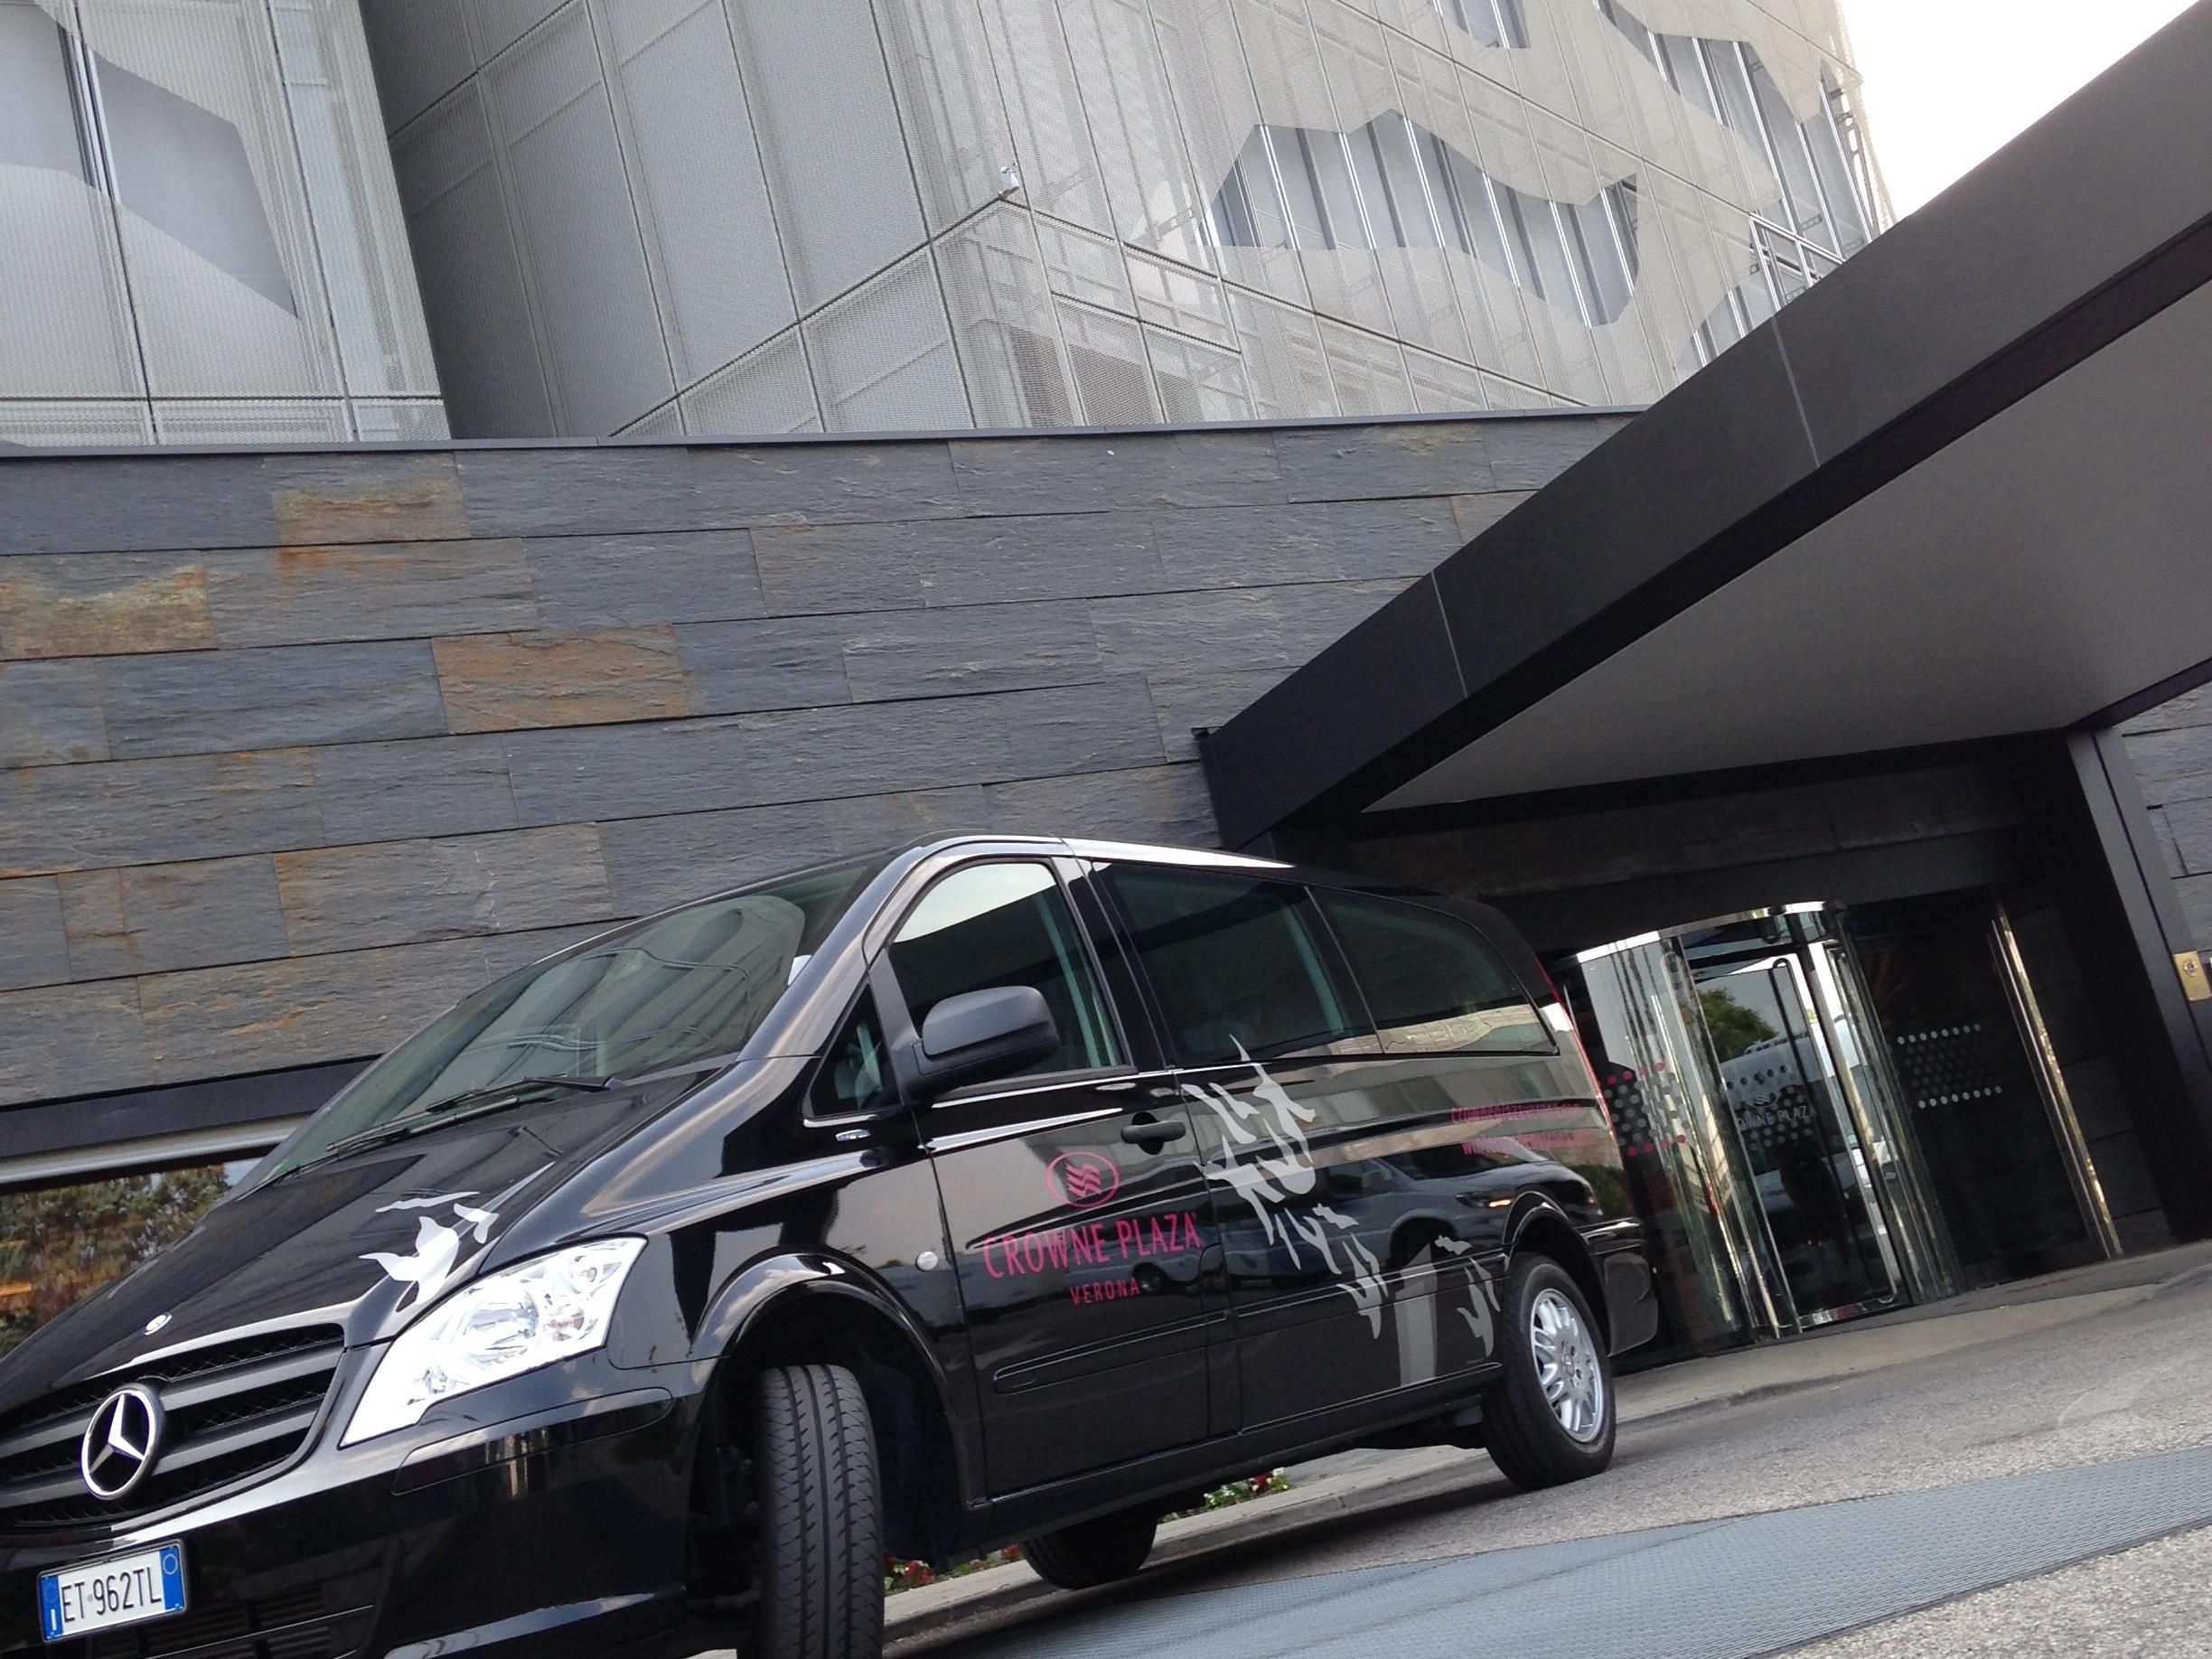 The hotel offers to its guests a Shuttle Service (max 7 people) upon availability at check in,  to/from the City Centre at scheduled times
MORNING   &   AFTERNOON 

To come back we offer the same service at 15 minutes past each of time scheduled.

*Time can change during the season 
** The service can not be book before check in 